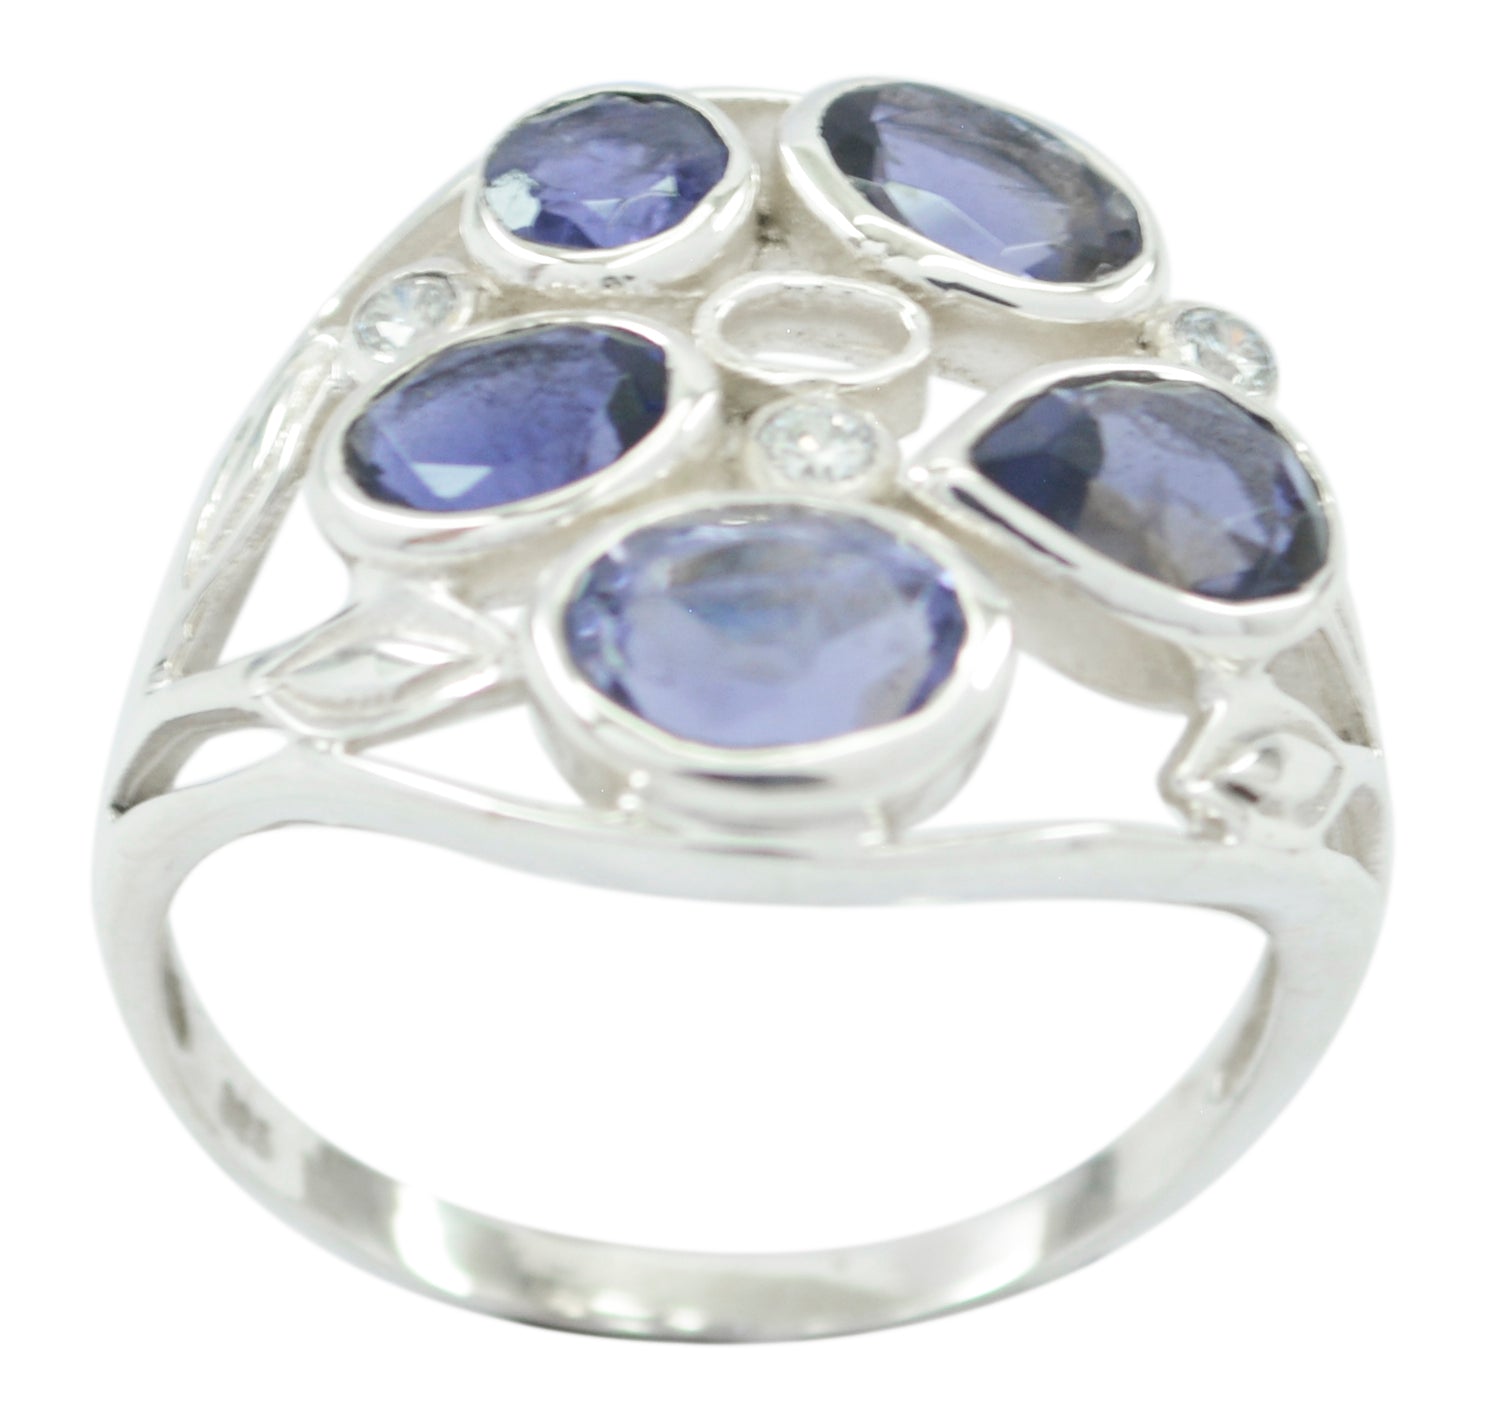 Excellent Stone Iolite 925 Sterling Silver Rings Melania Trump Jewelry